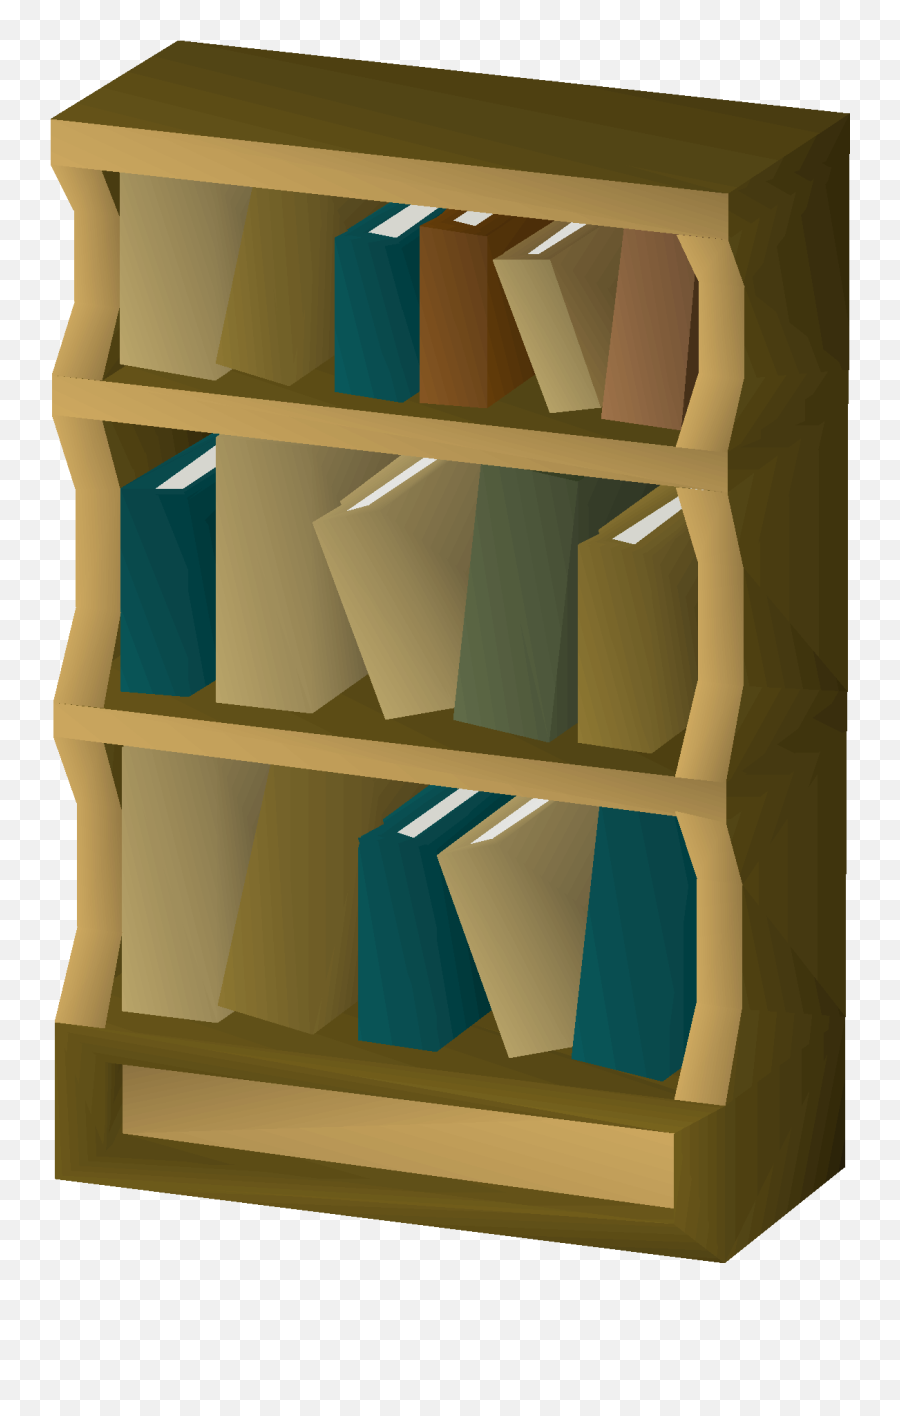 Wooden Bookcase Mahogany Homes - Osrs Wiki Emoji,Bookcase Png